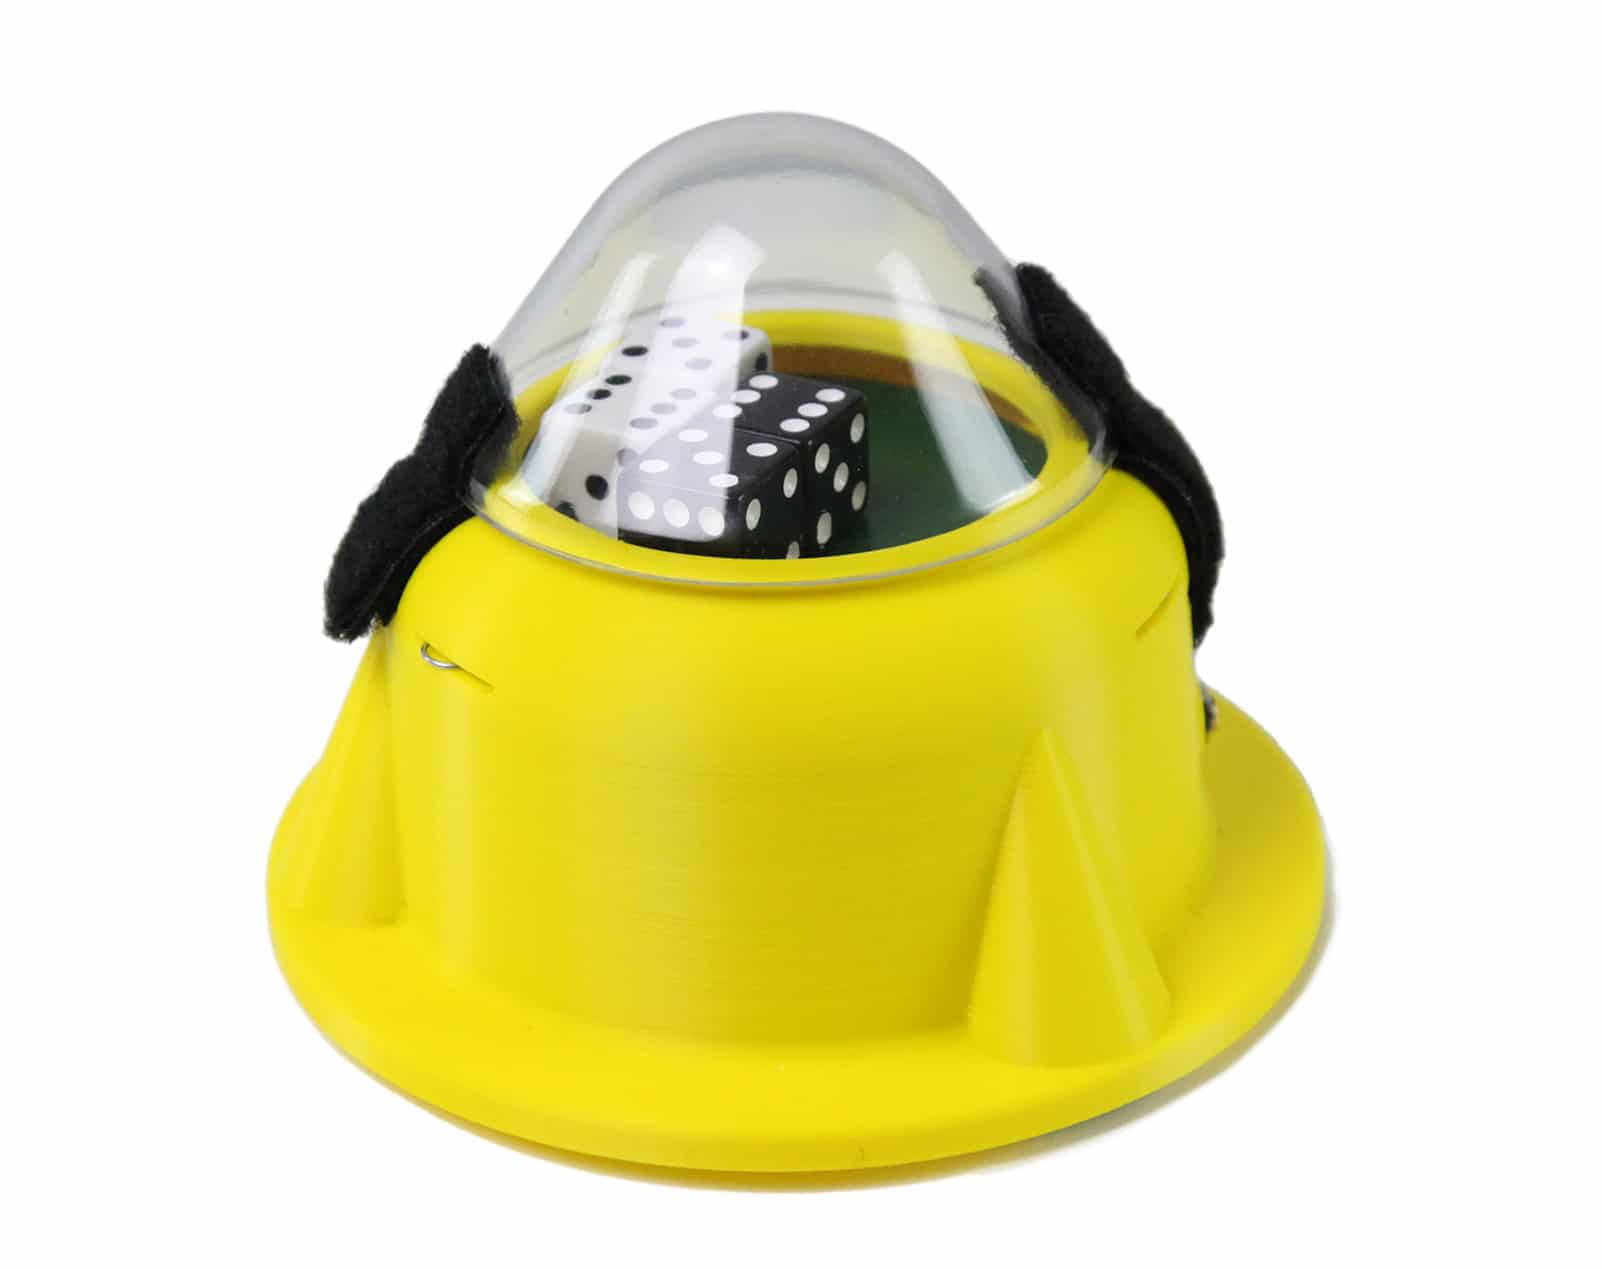 High Roller interactive yellow tow with black and white dice inside a dome.